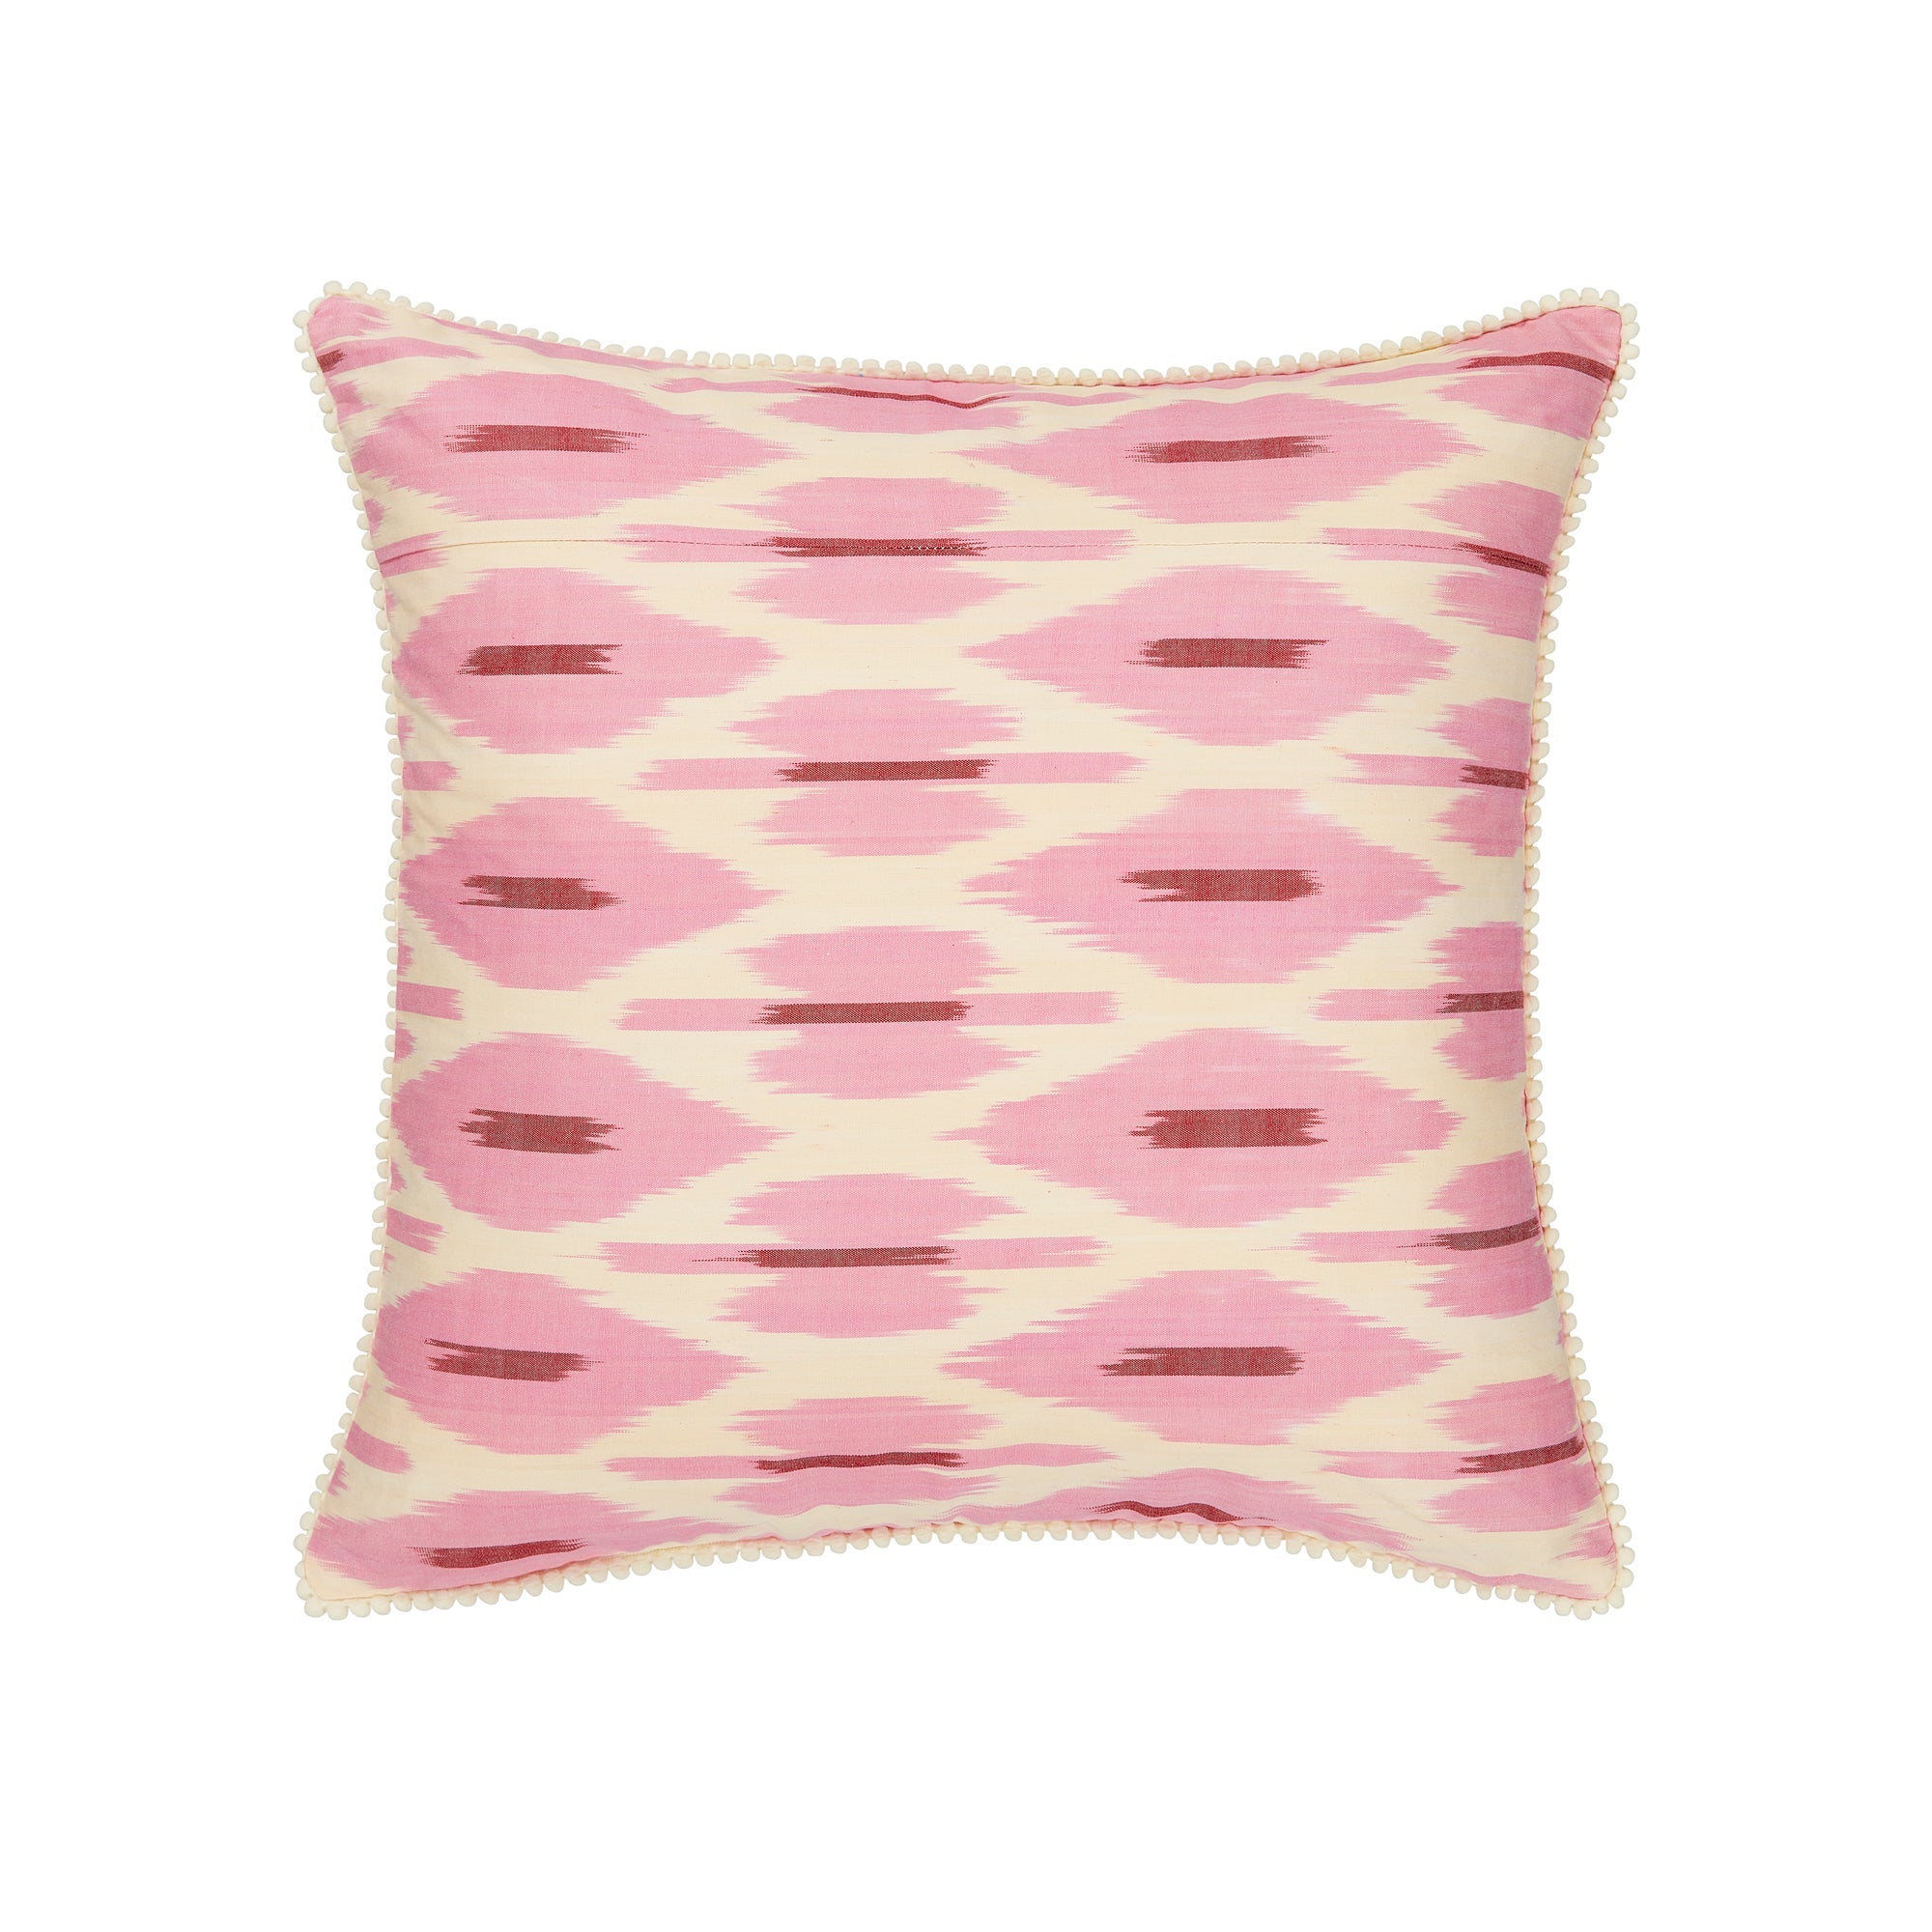 PINK AND CREAM SQUARE CUSHION